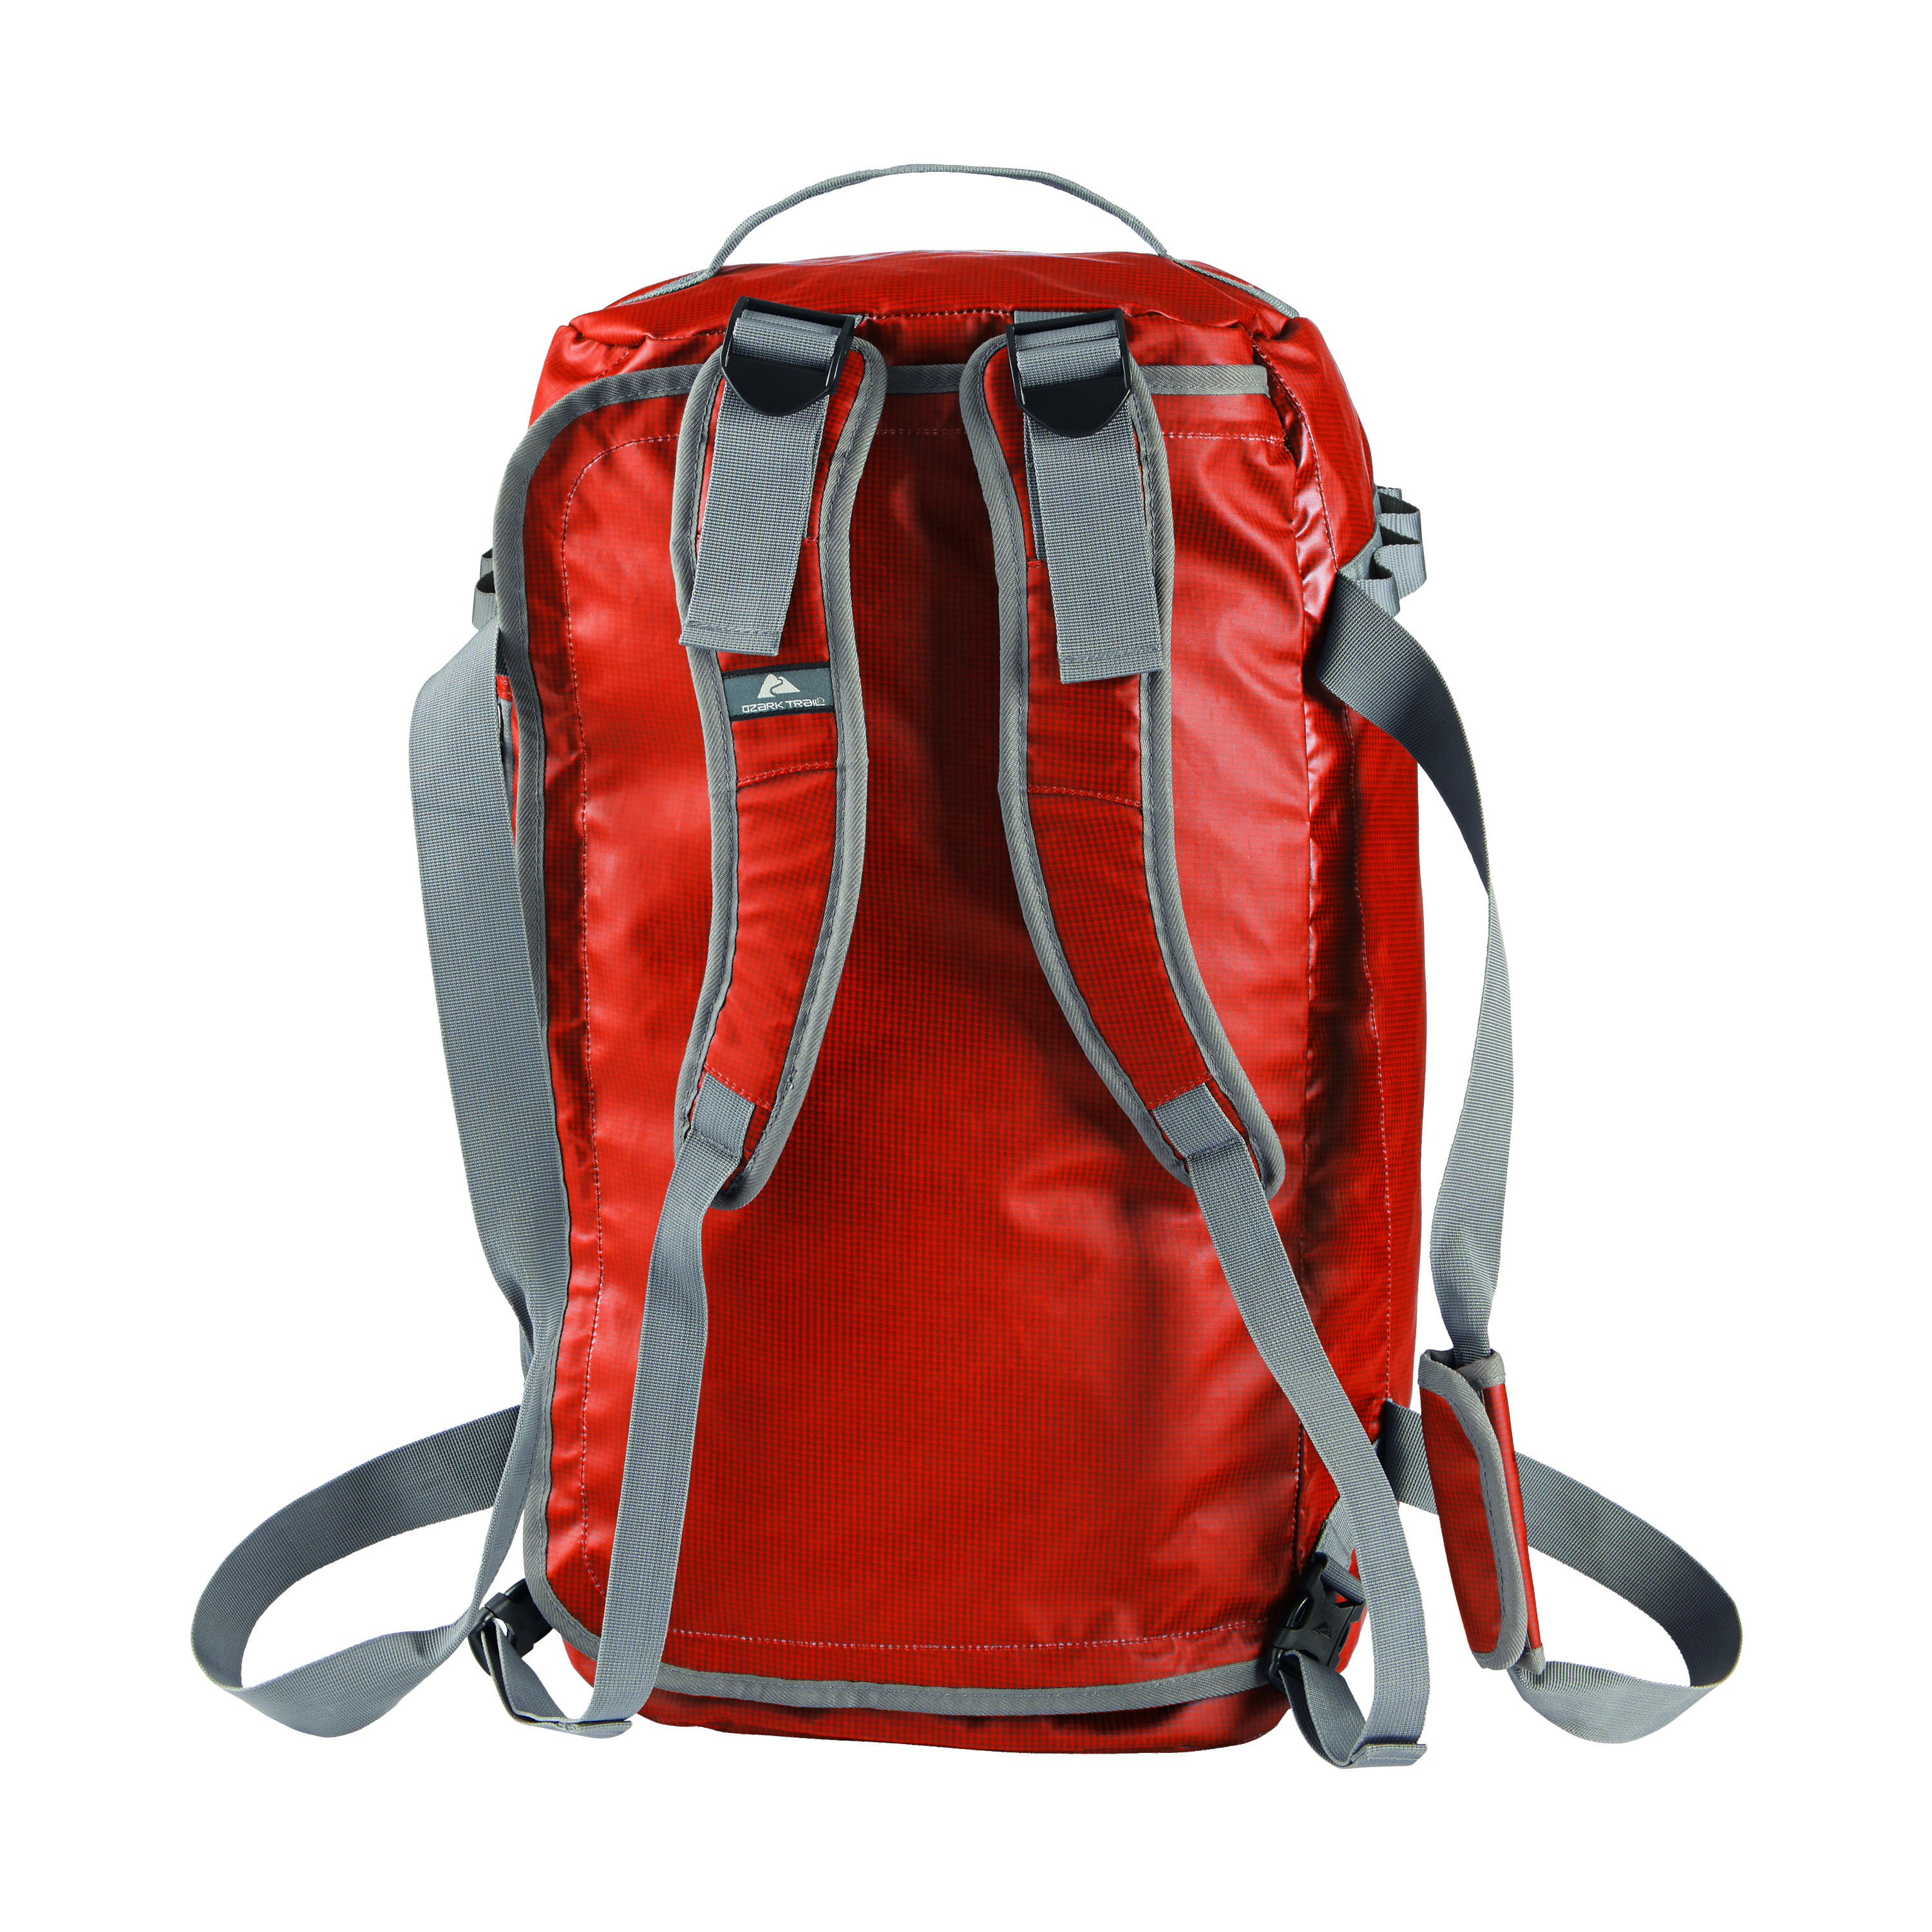 Ozark Trail 50L Duffel Bag with Backpack Straps, Unisex, Solid Red 